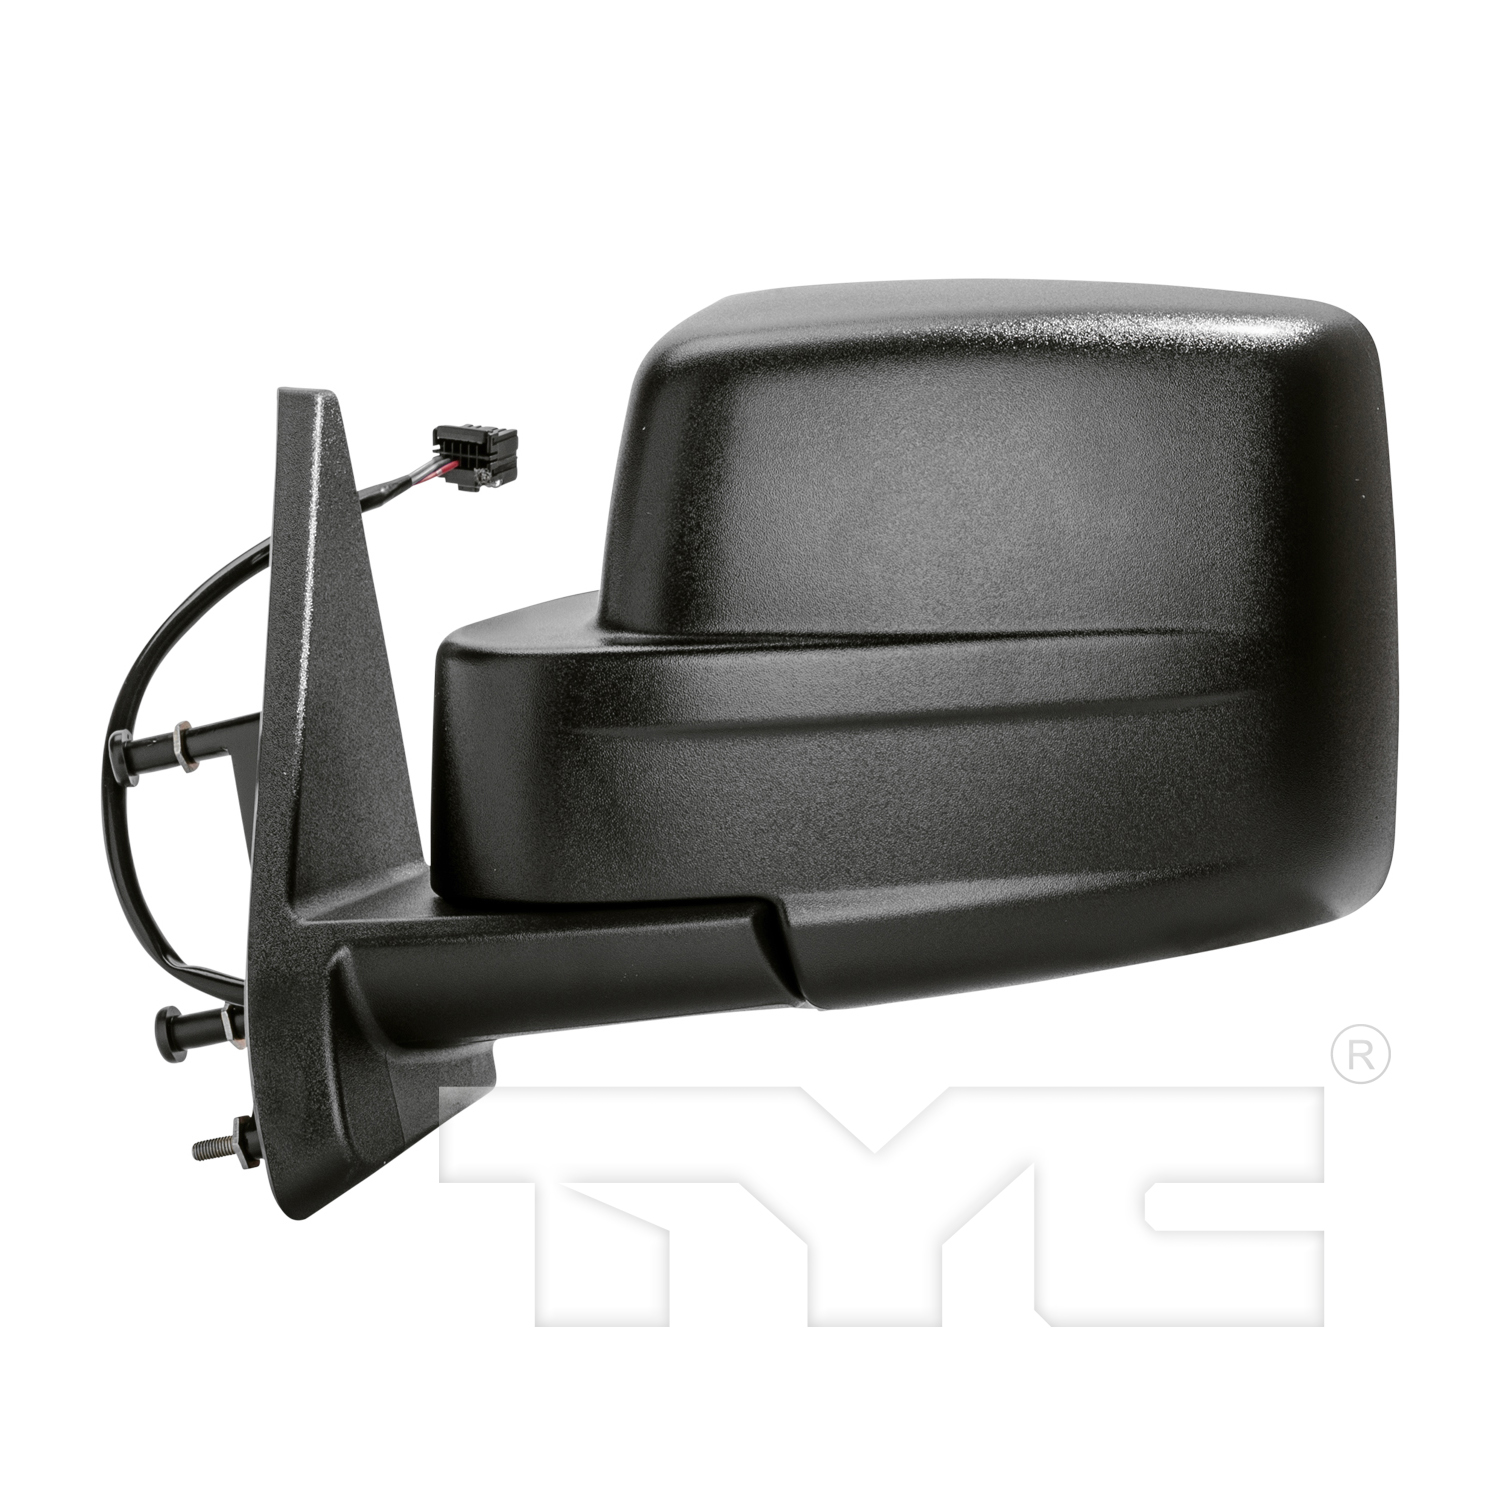 Aftermarket MIRRORS for JEEP - PATRIOT, PATRIOT,07-09,LT Mirror outside rear view